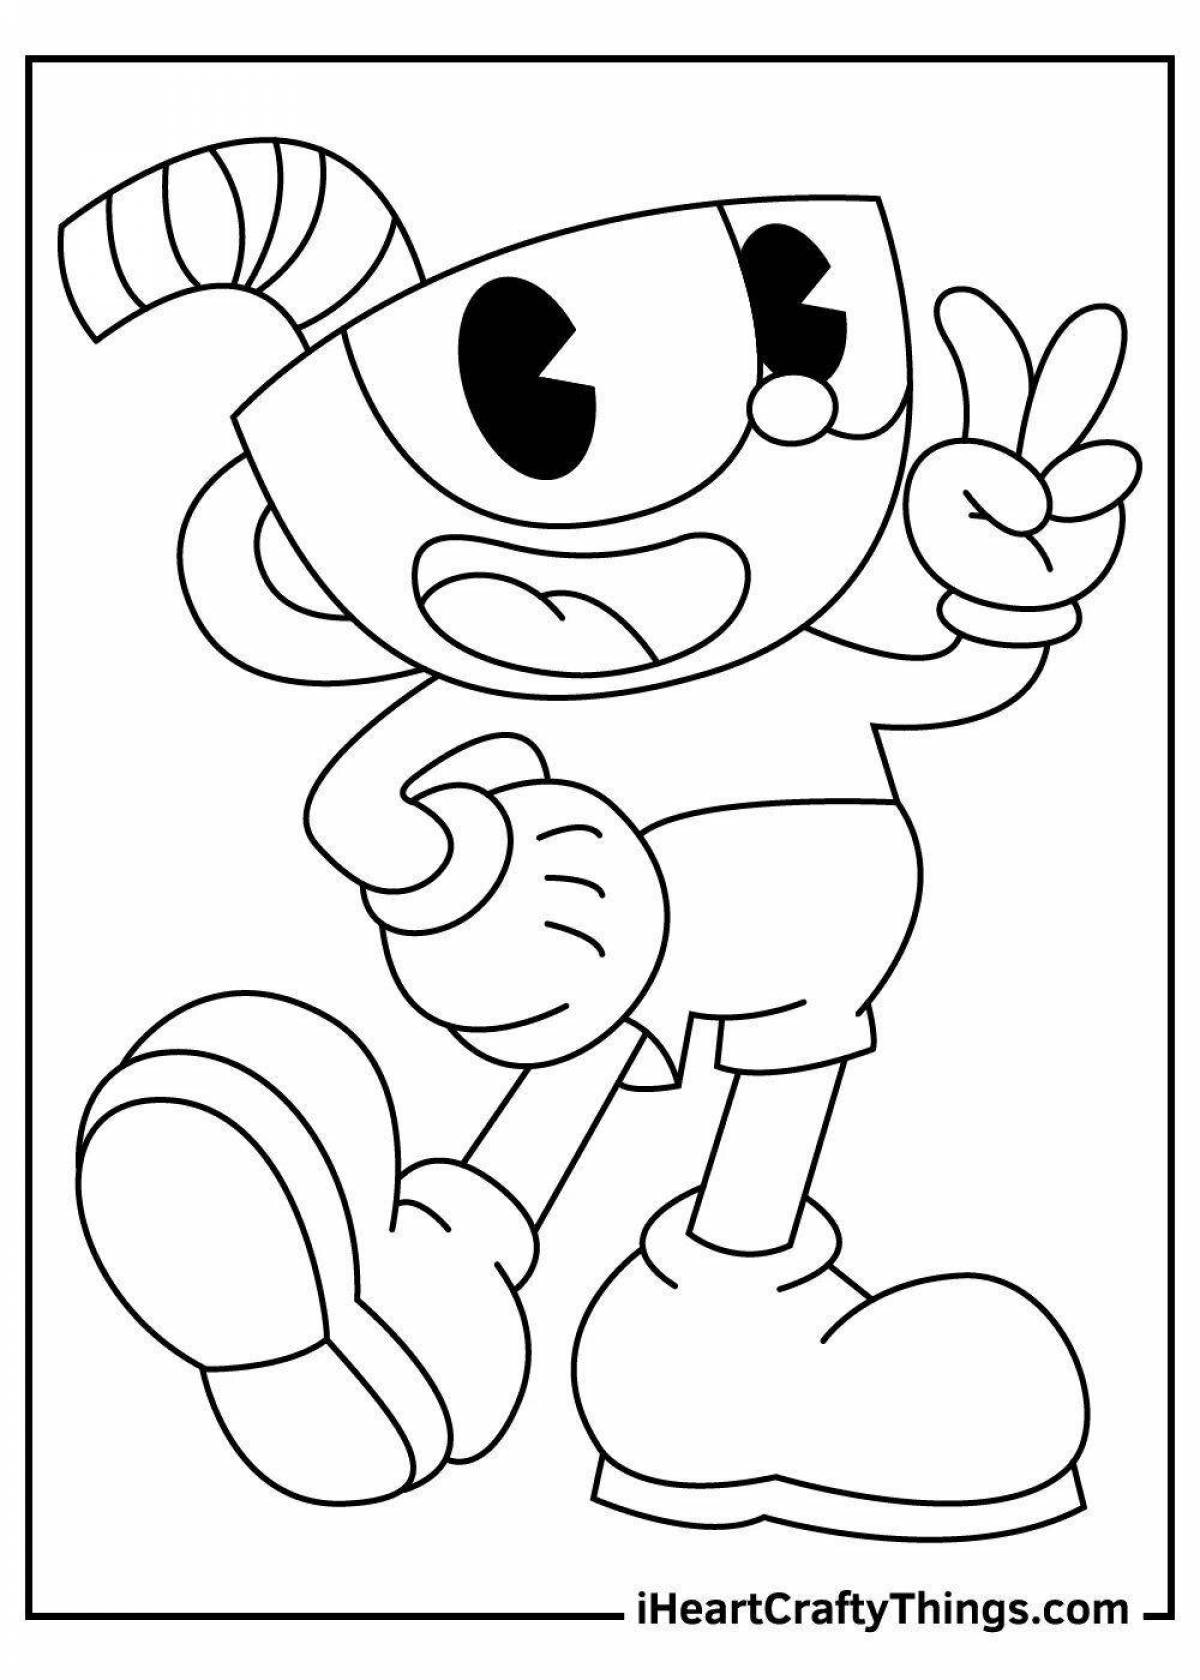 Rampant cuphead coloring page